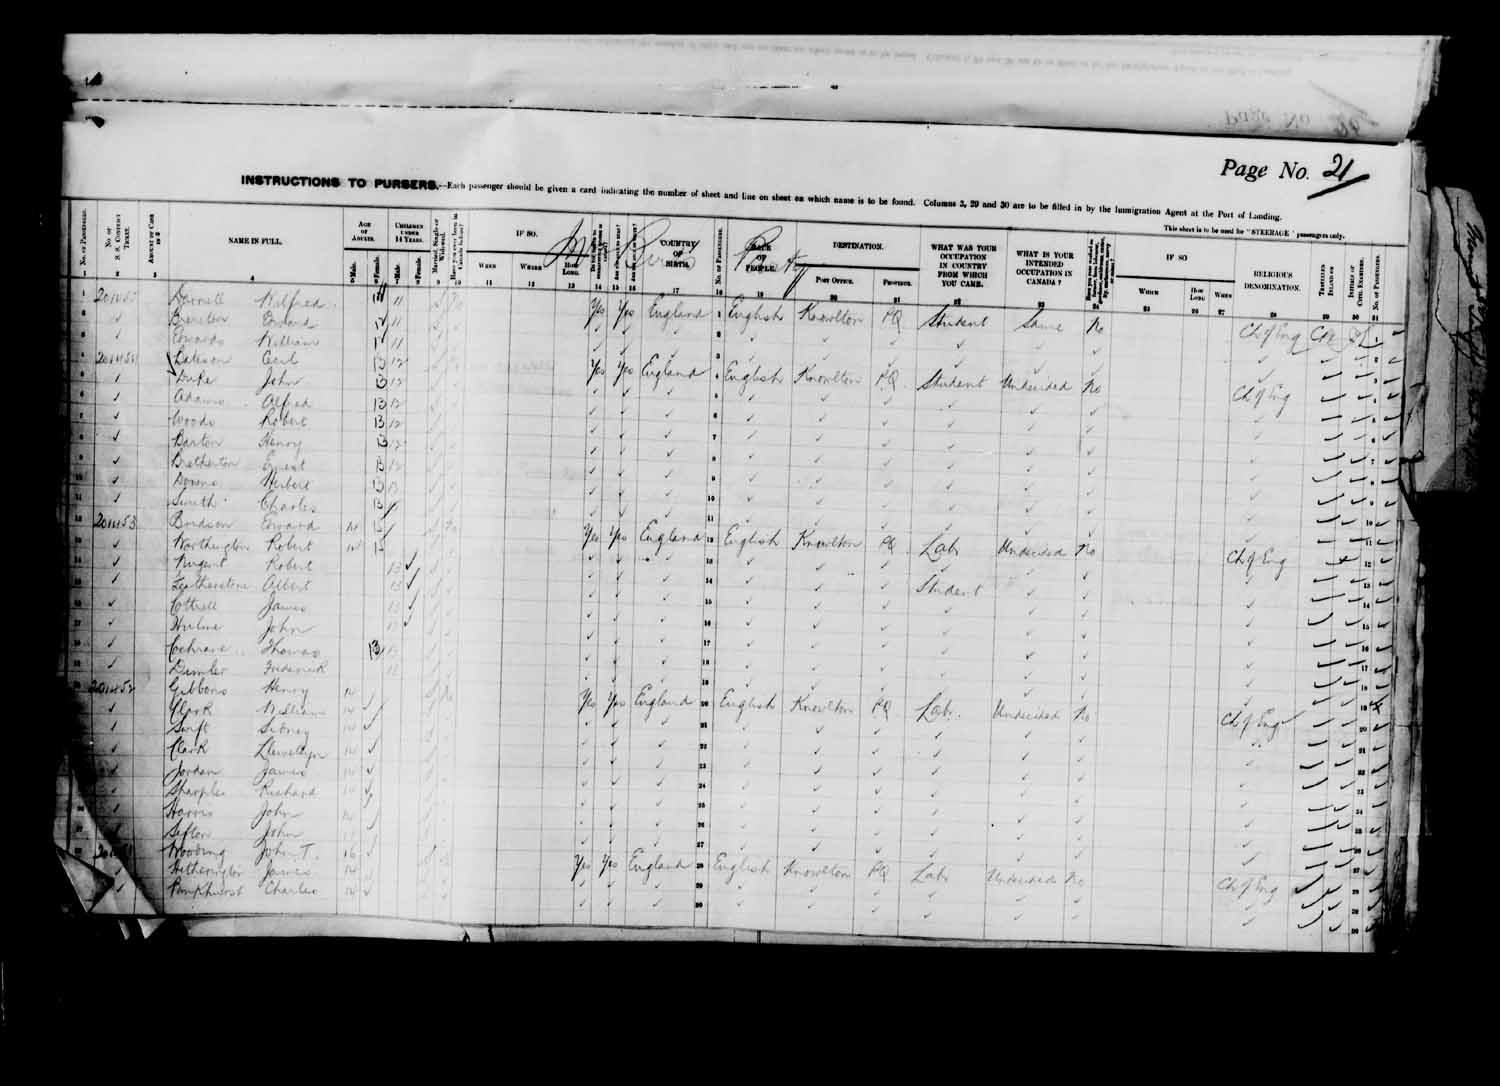 Digitized page of Passenger Lists for Image No.: e003627210